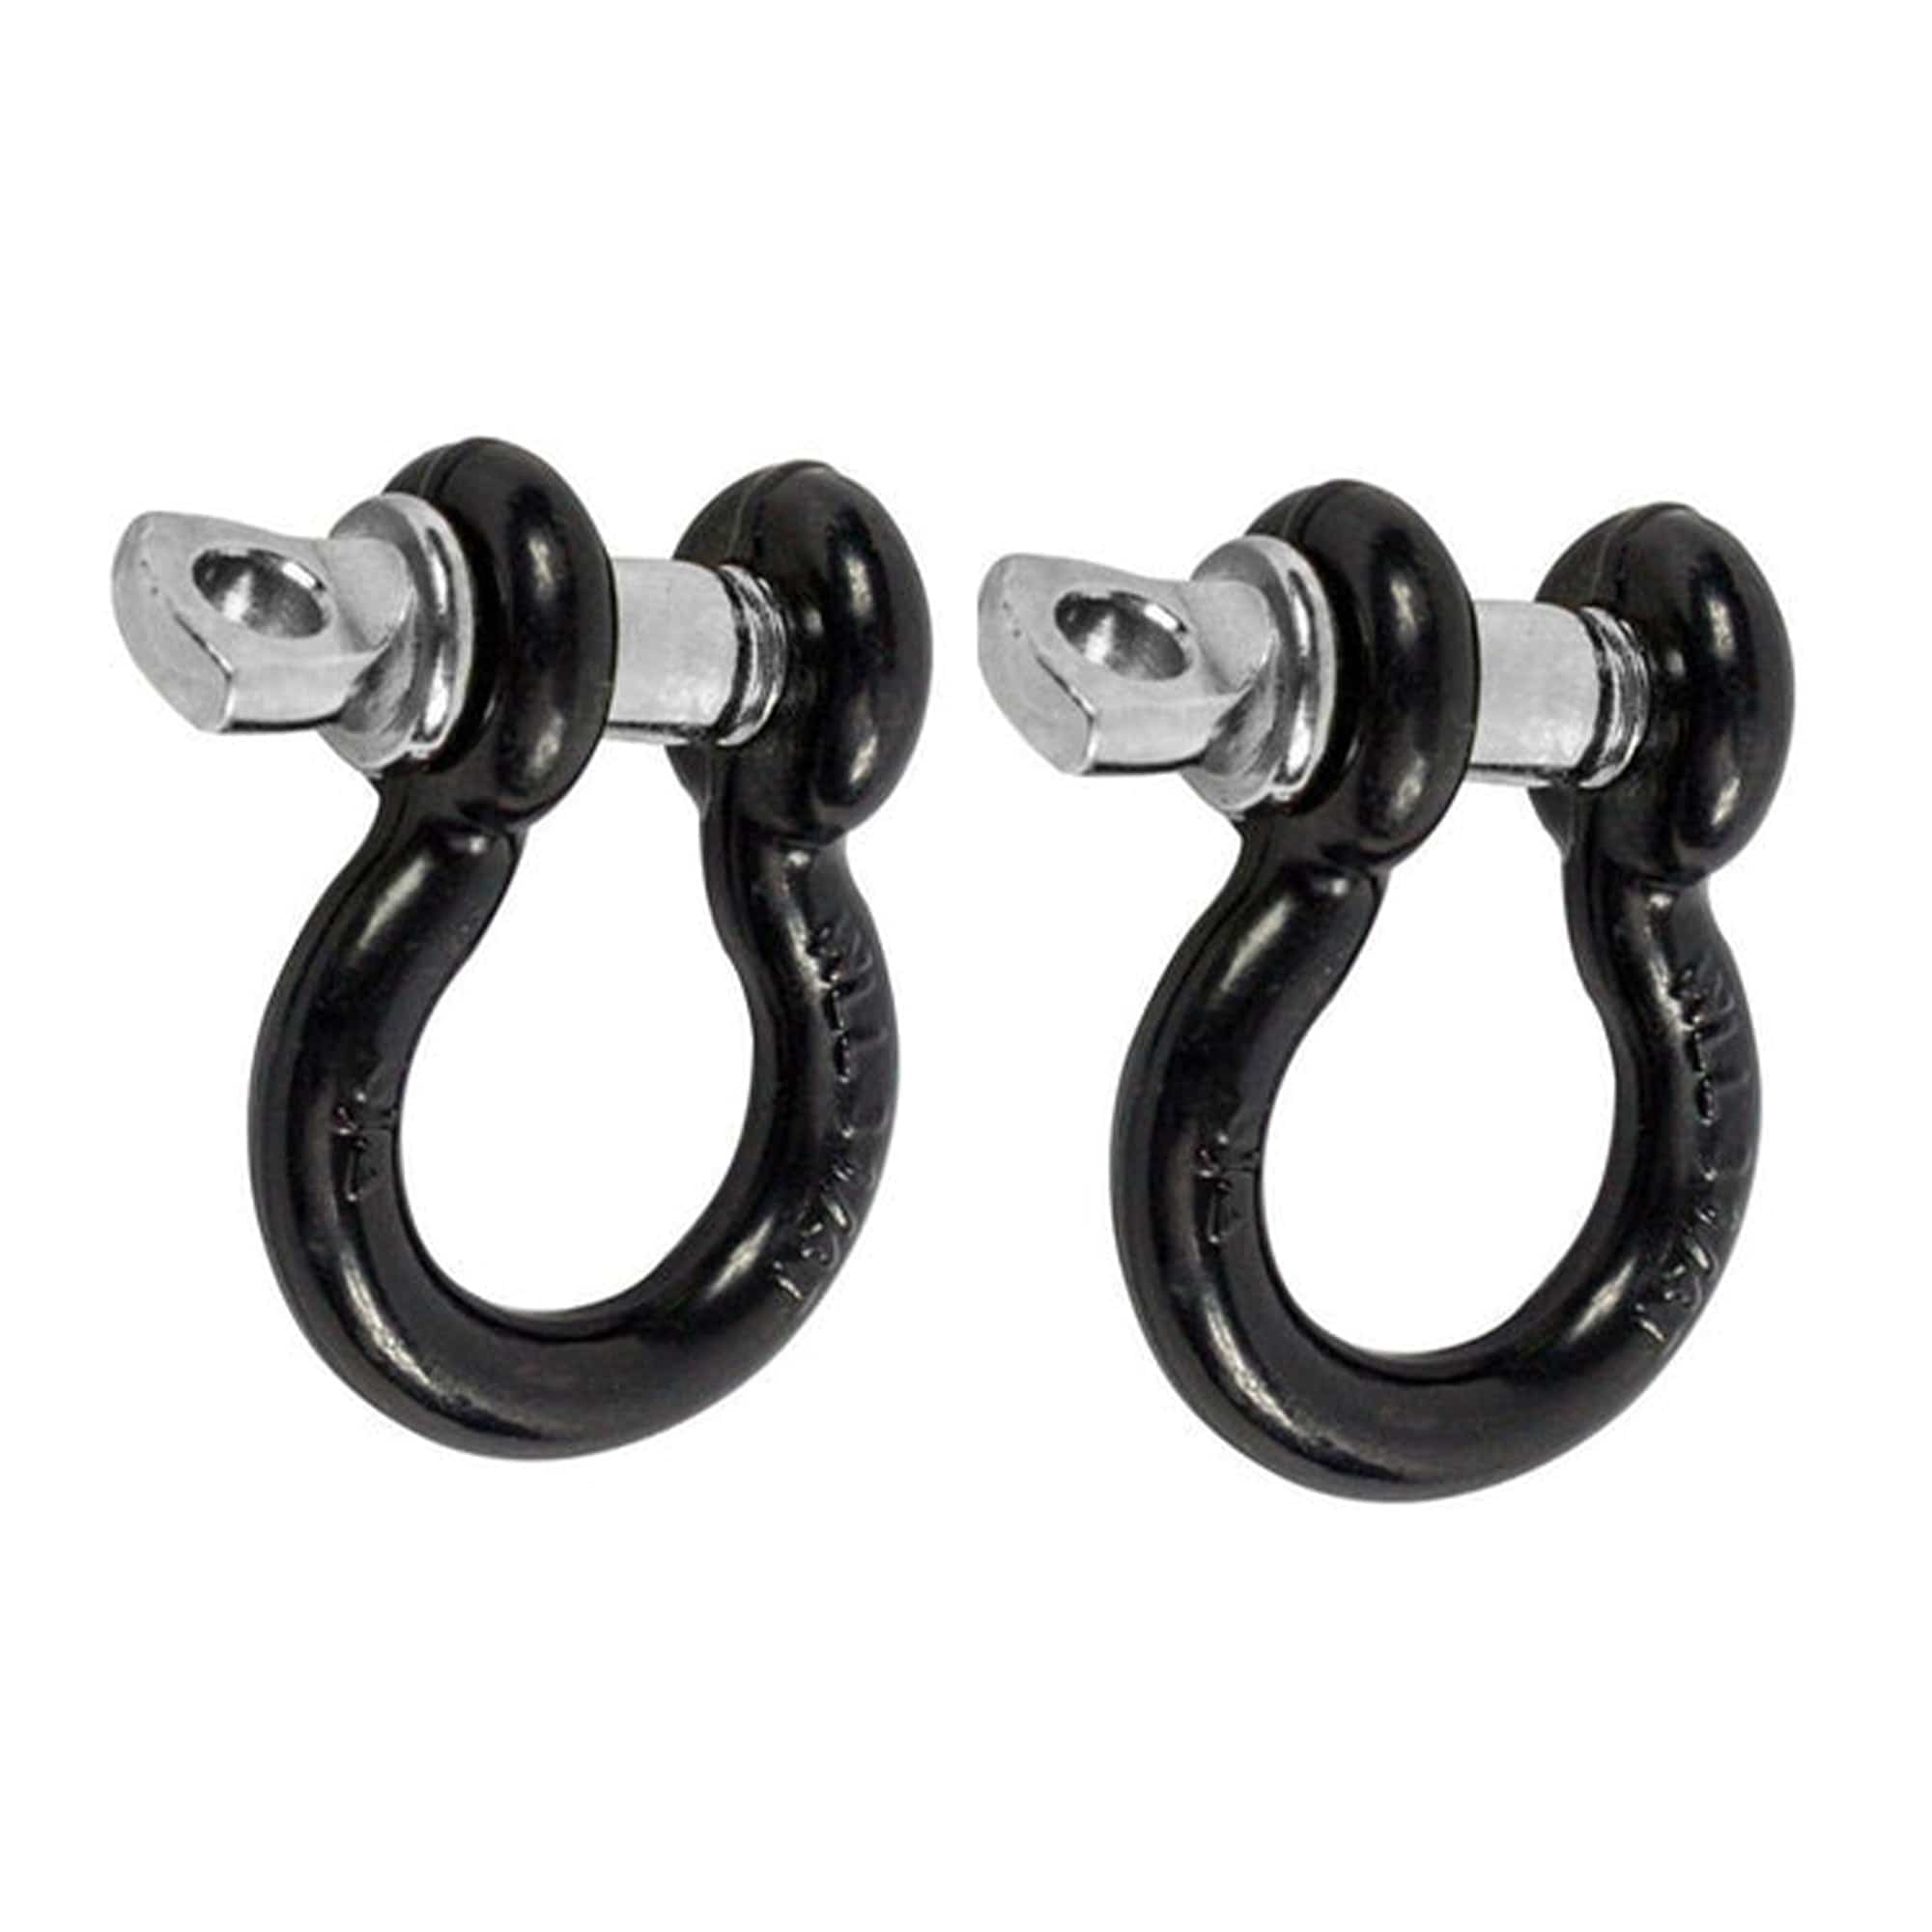 Bulletproof Hitches SMALLSHACKLE 5/8" Channel Shackles for Safety Chains (Pair)